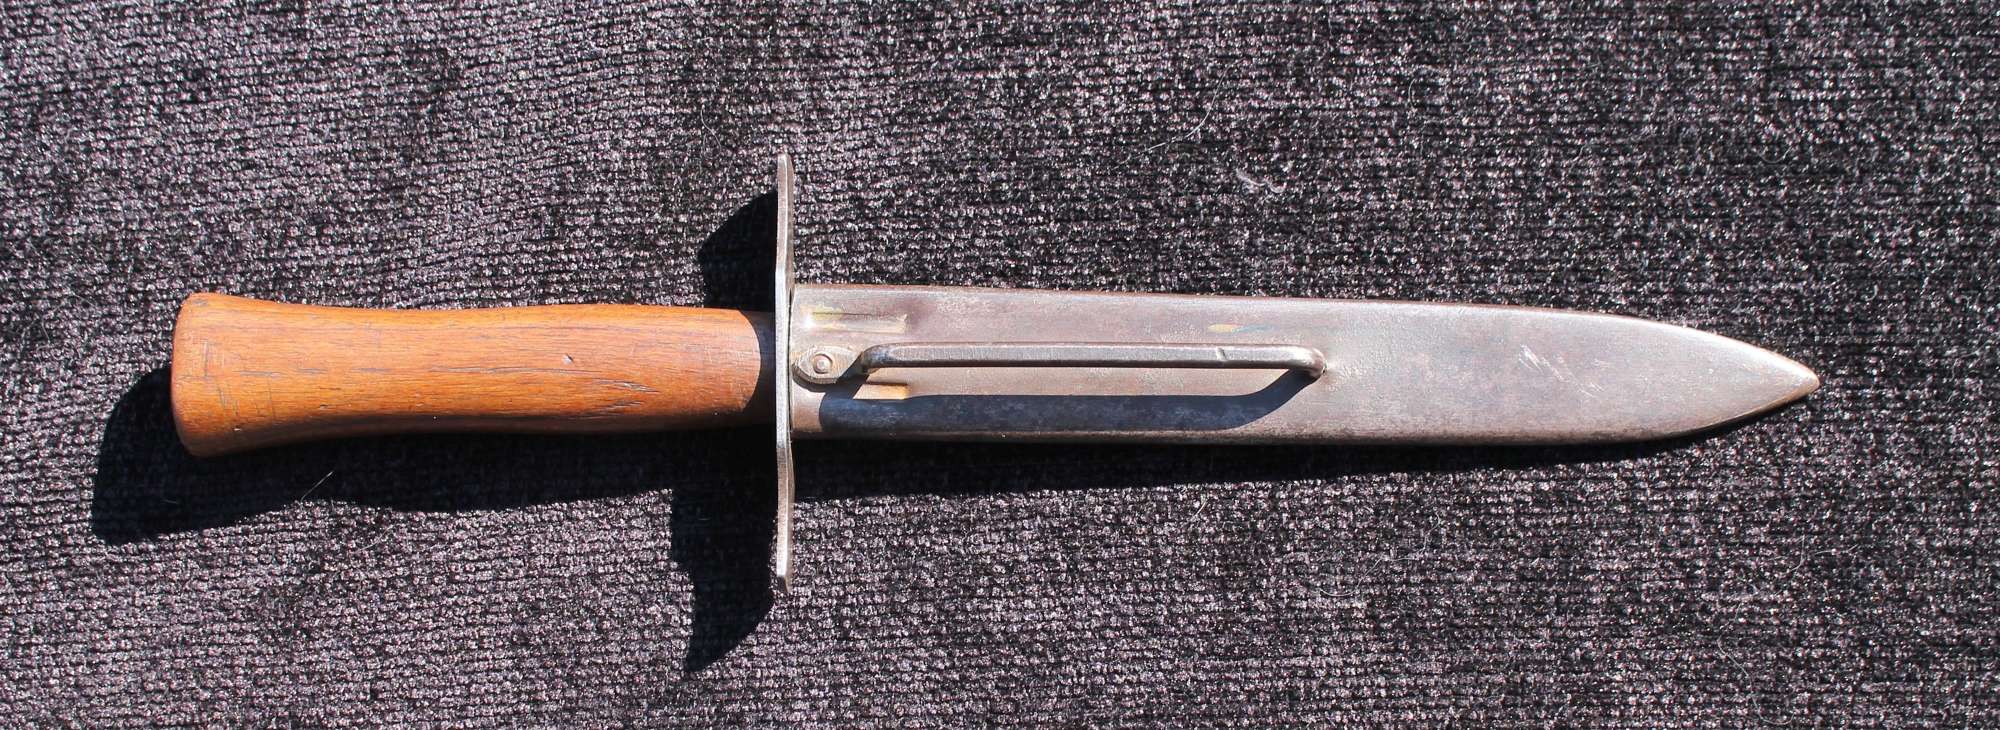 French Model 1916 Fighting Knife